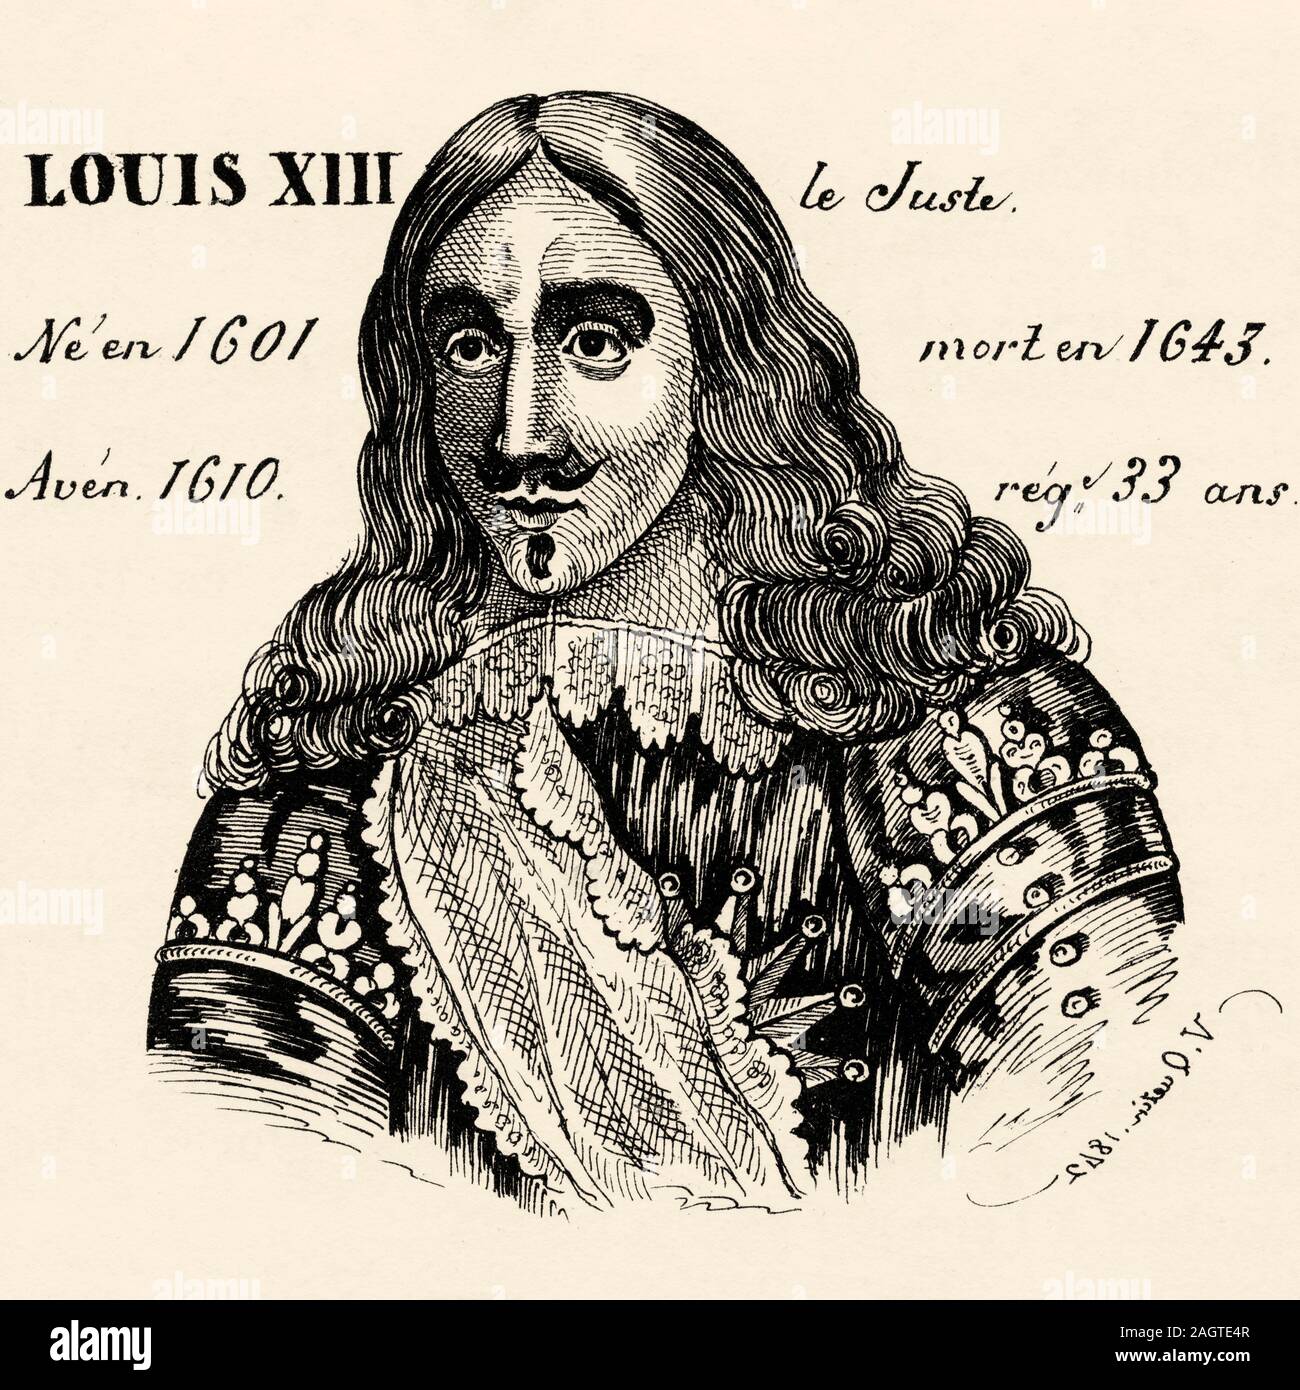 Portrait of Louis XIII the Just (1601 - 1643). King of France from 1610 to  1643. House of Bourbon. History of France, from the book Atlas de la France  Stock Photo - Alamy